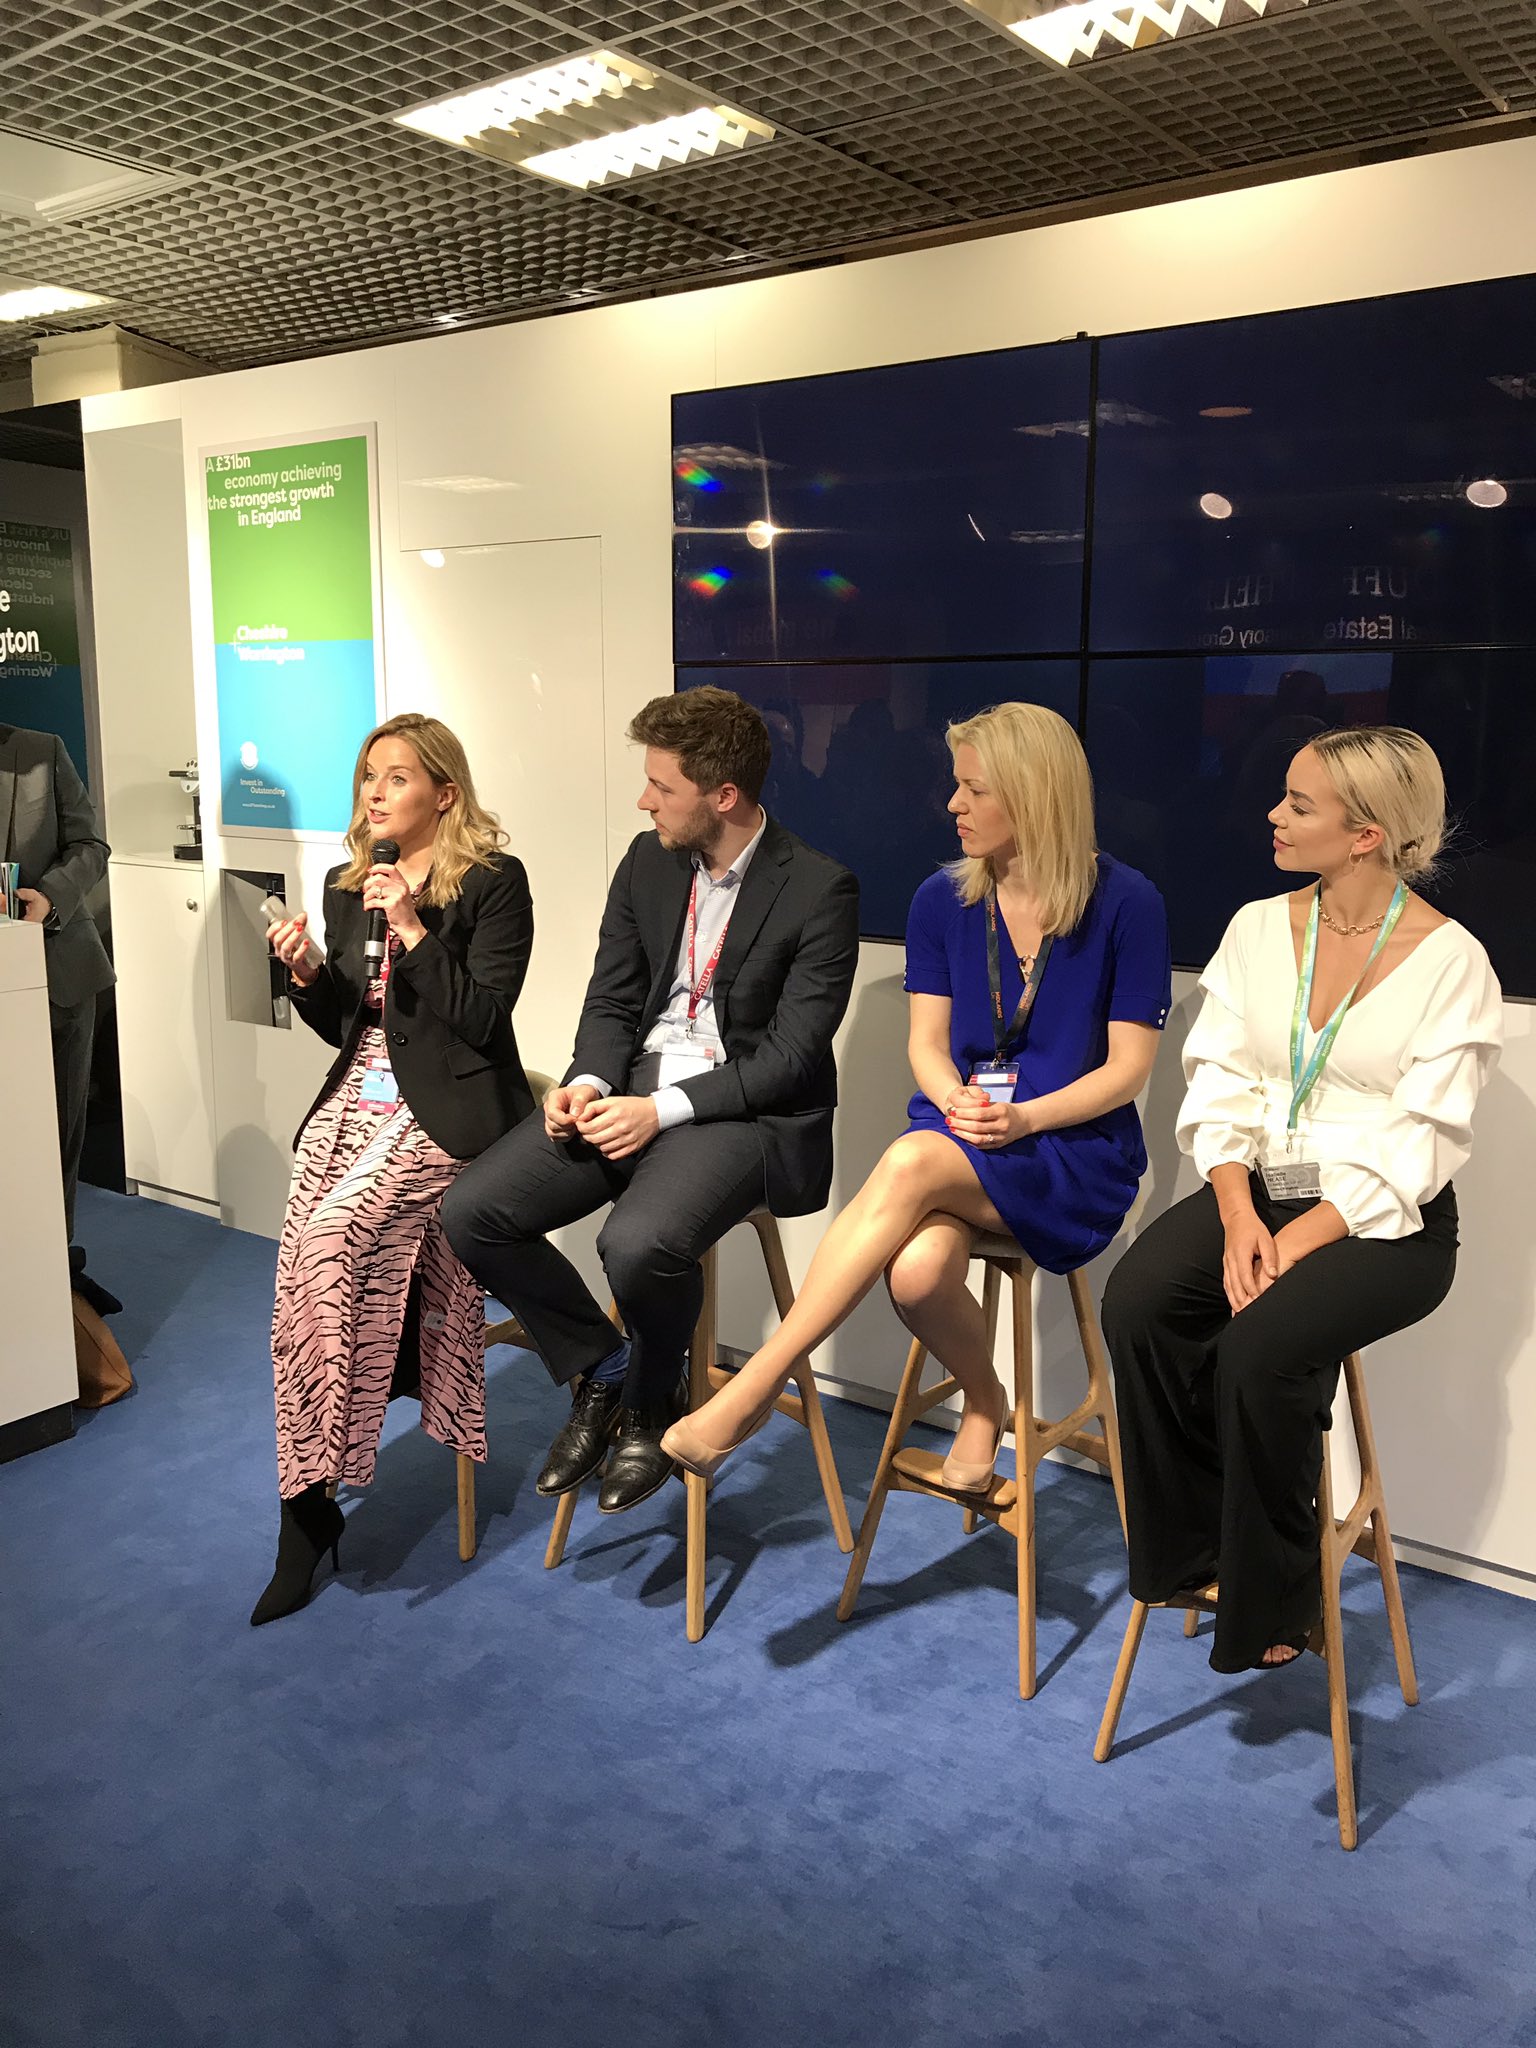 Cheshire Warrington LEP on Twitter: "Kate Healey - Inform PR and Communications “We need to move with the and use Snapchat or Instagram to engage with younger market” #CheshireMIPIM #MIPIM2019